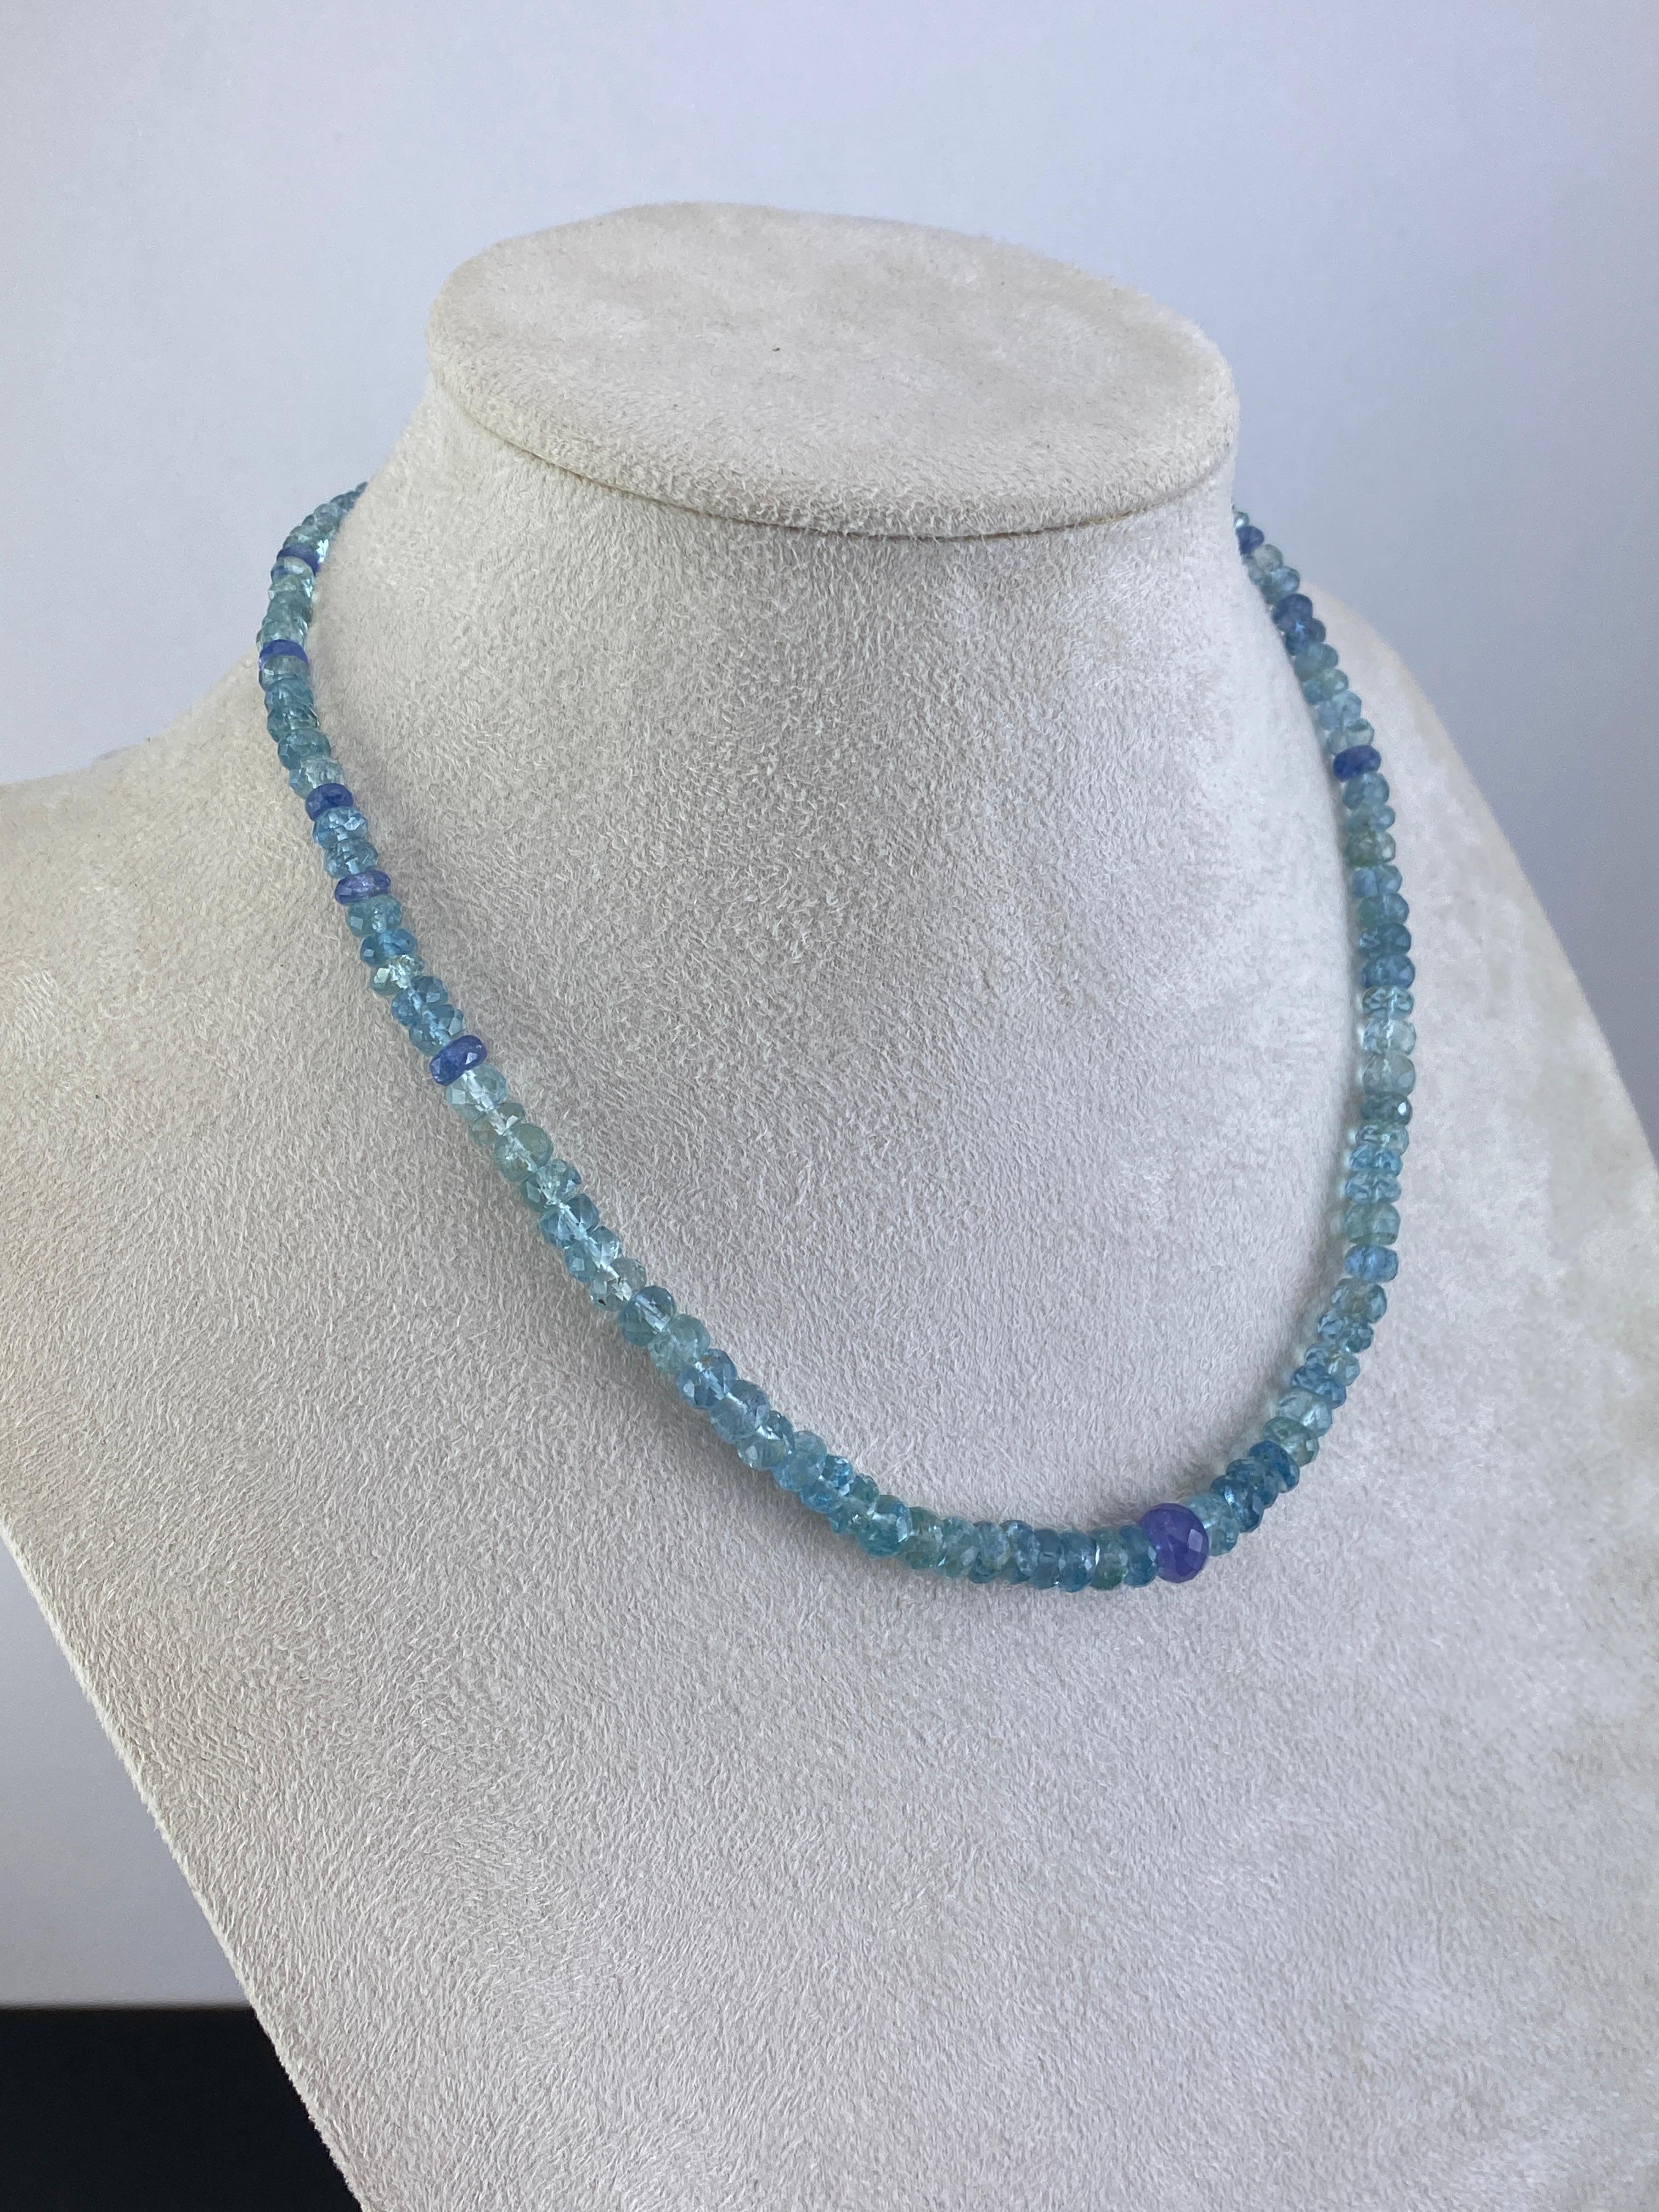 A beautiful and elegant necklace, with 95 carats of Aquamarine and 4 carat Tanzanite beads. The necklace is around 16 inches long, and can be altered. 
Please feel free to message us for more information! 